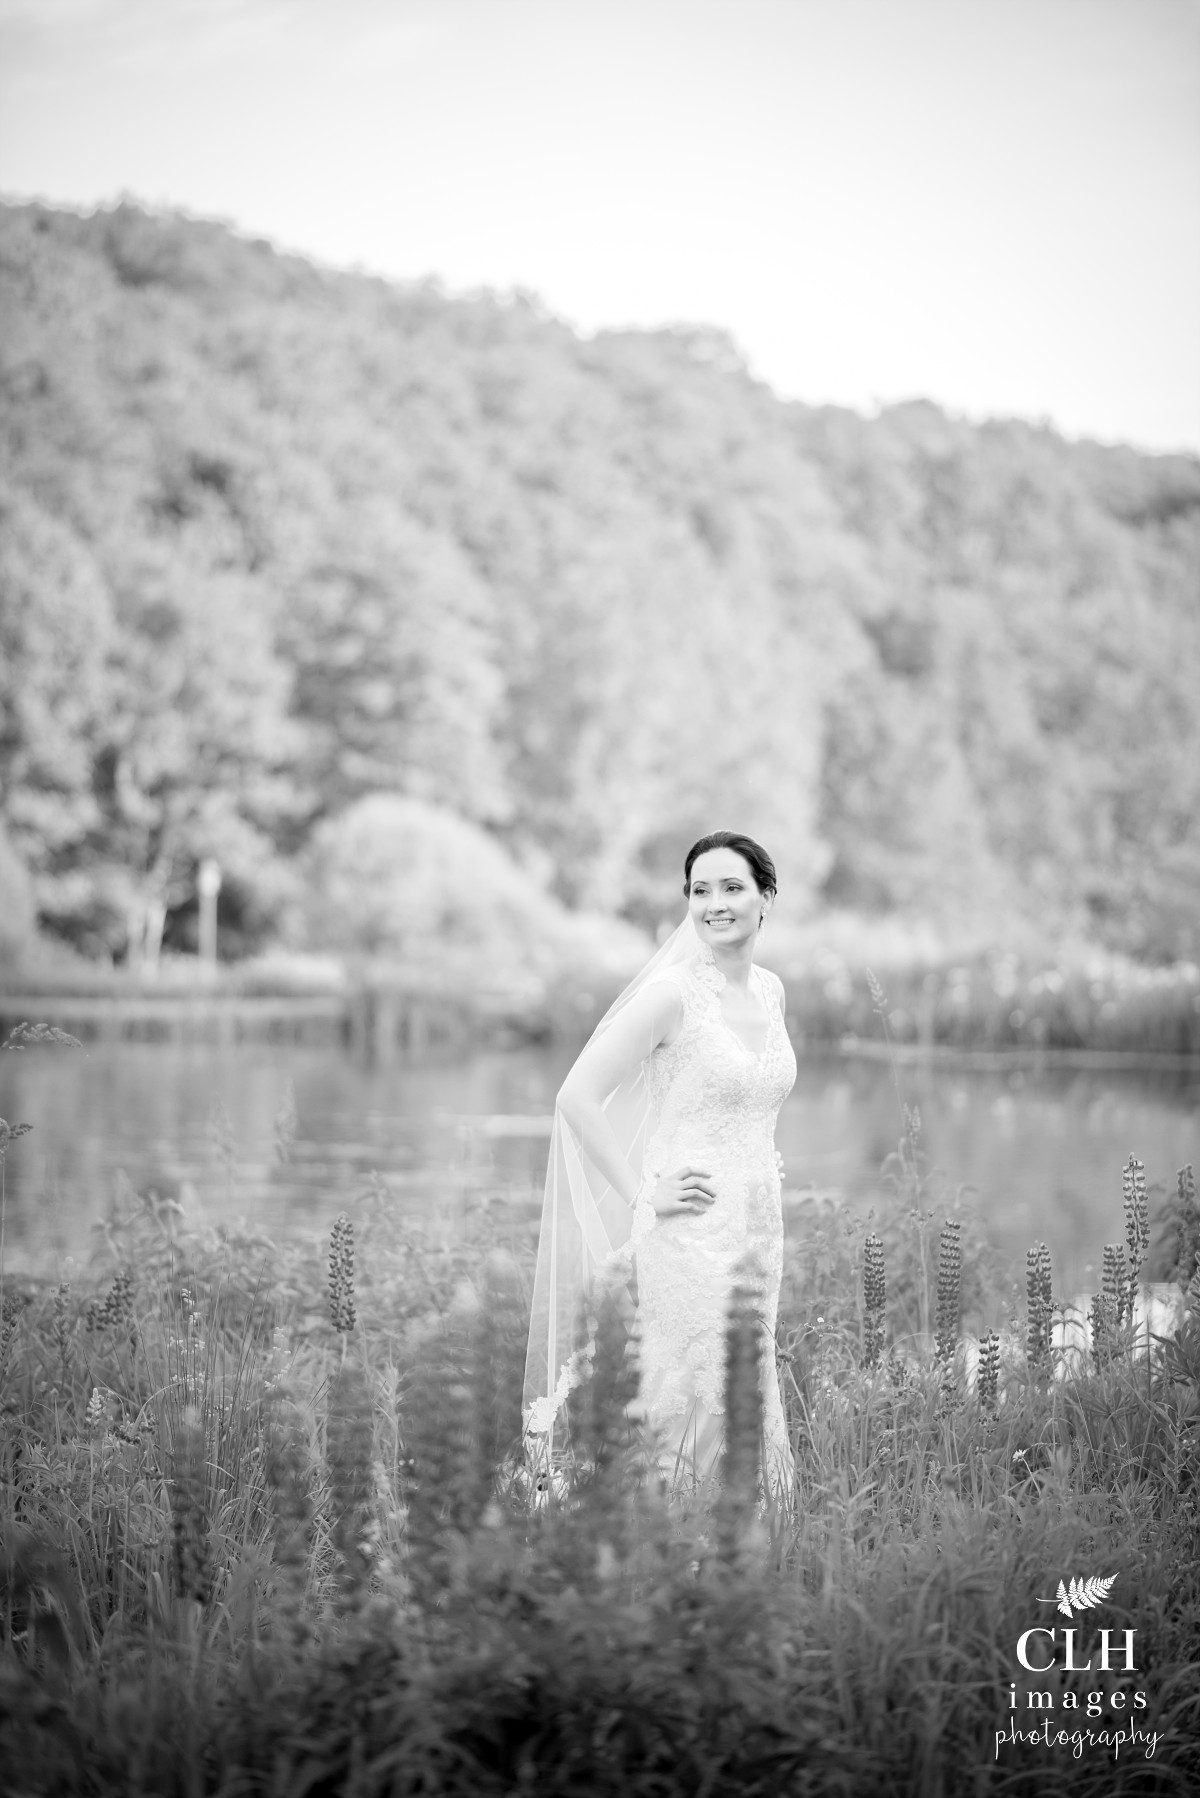 CLH images Photography Catskill New York Weddings Barn Weddings Rustic Weddings New York Wedding Photographer Becky and Harinder (72)